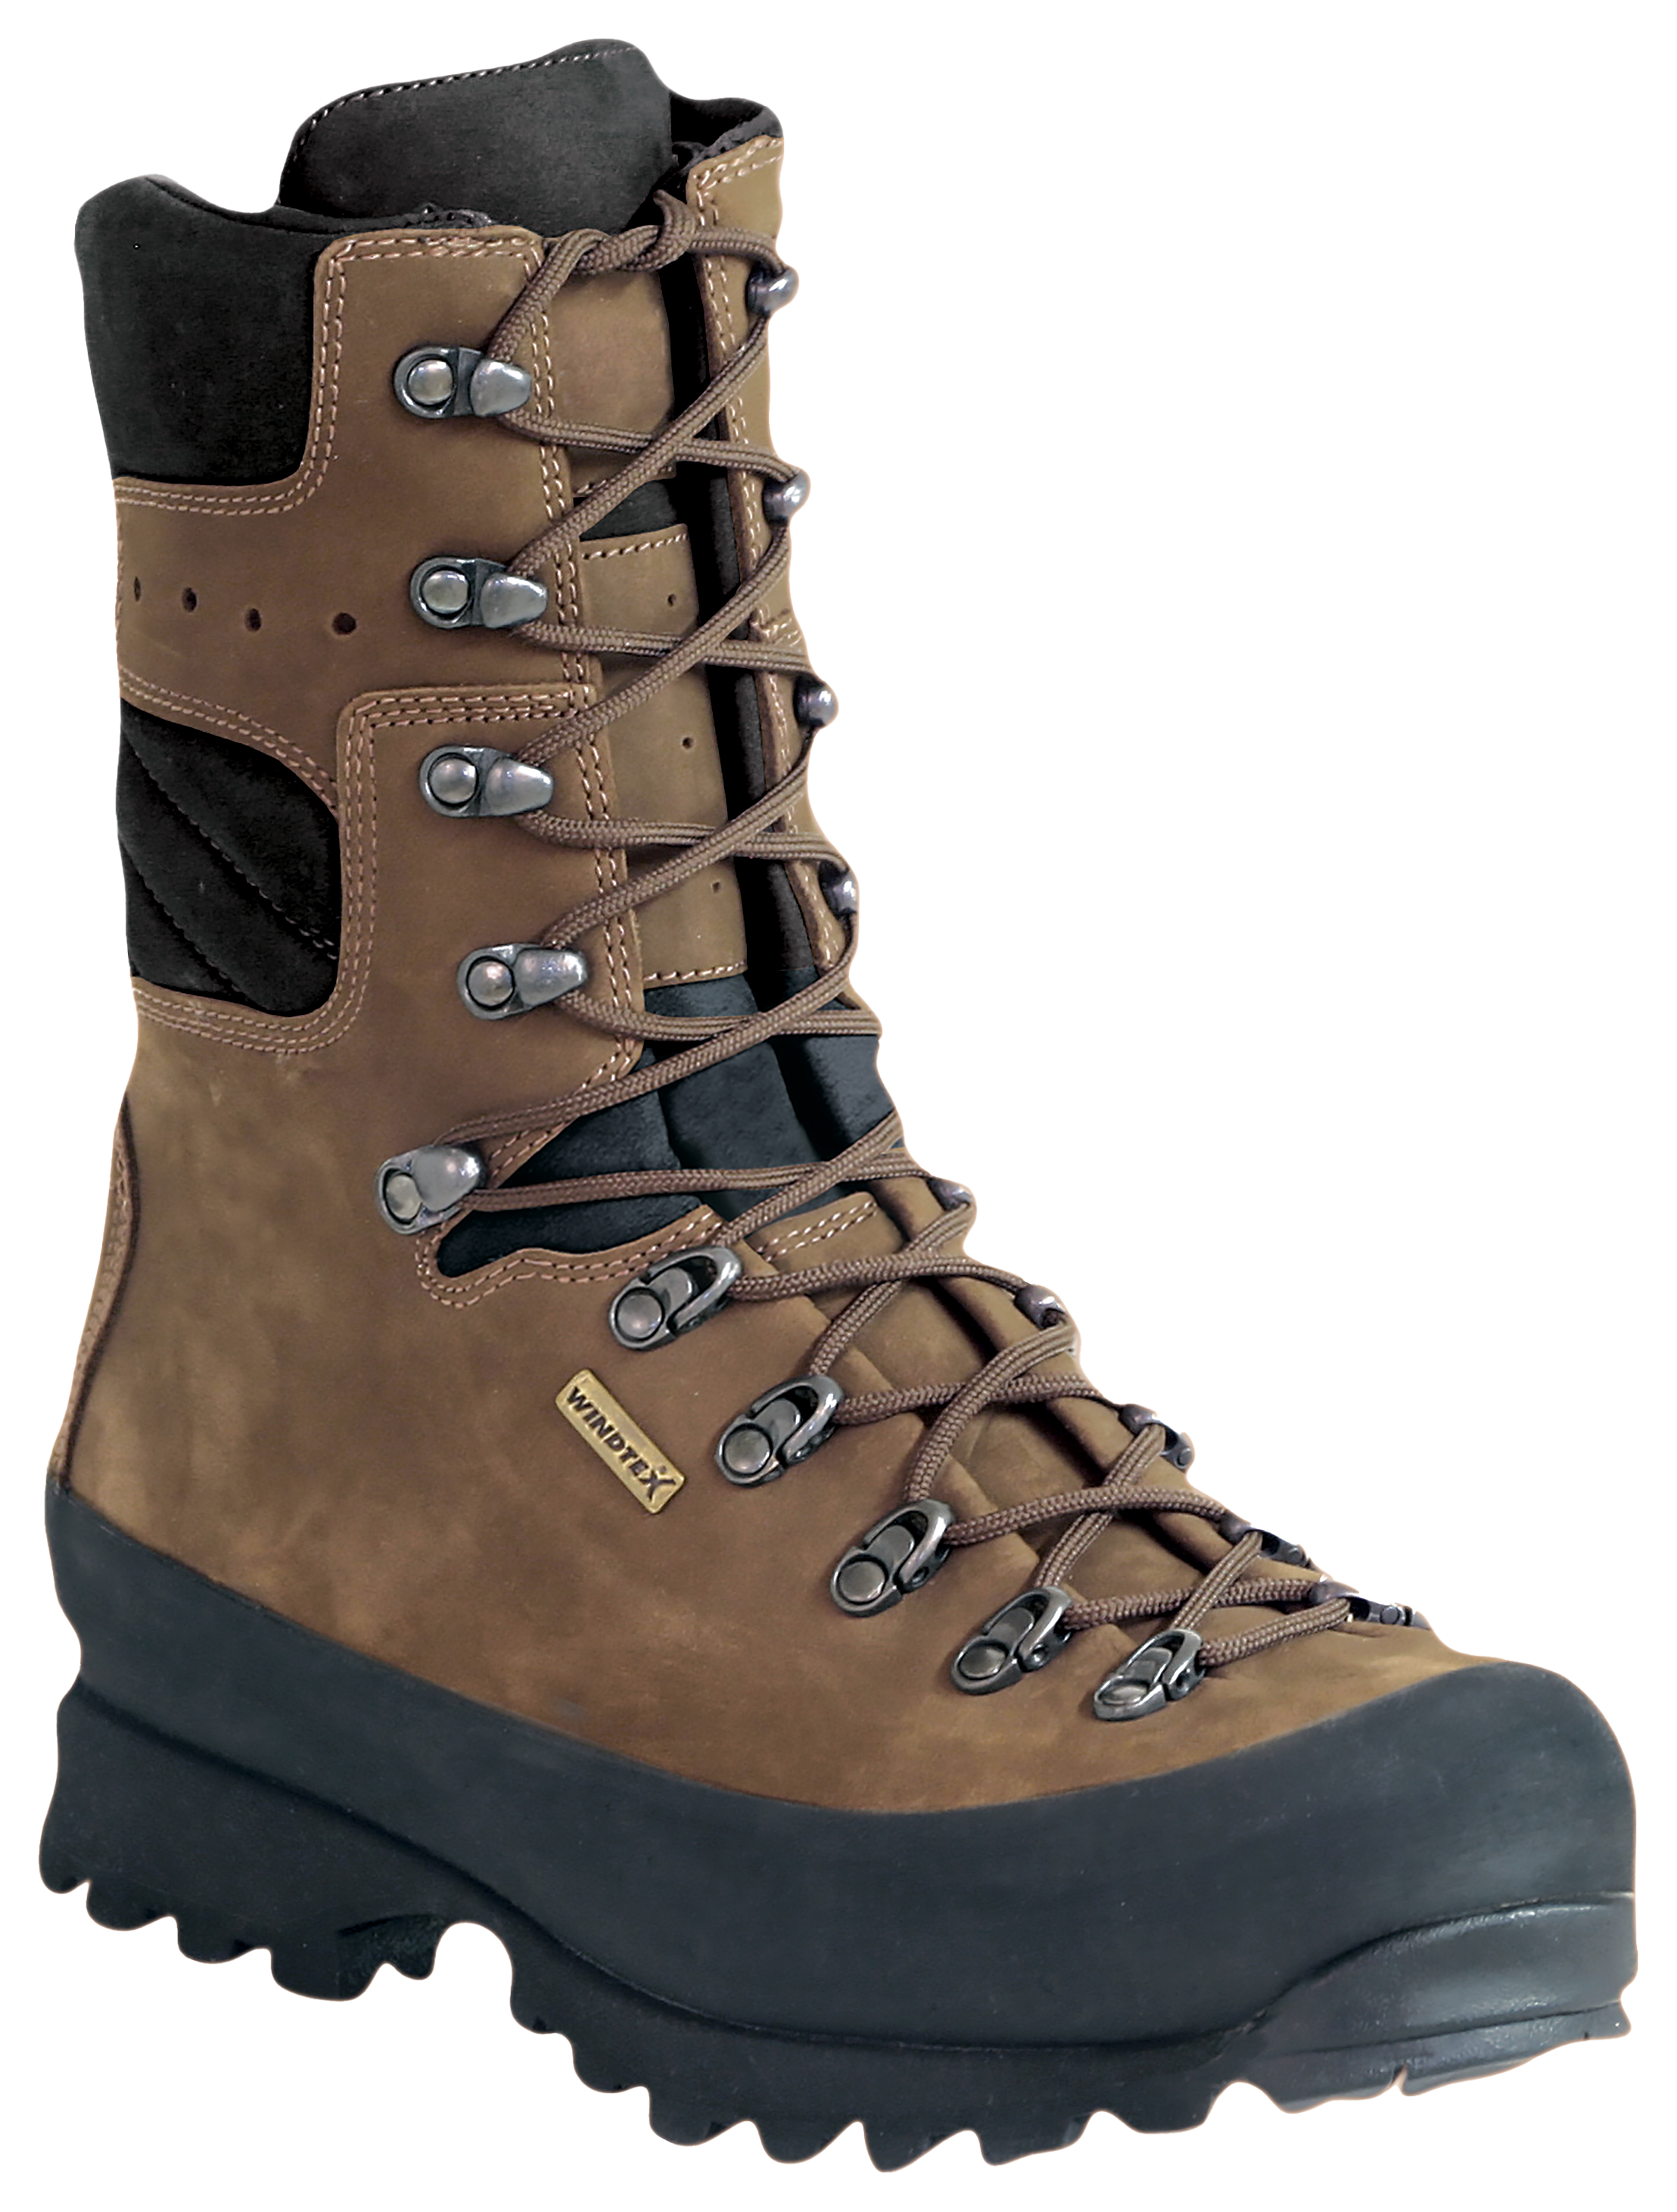 Kenetrek Mountain Extreme 1000 Insulated Waterproof Hunting Boots for Men - Brown - 11.5M